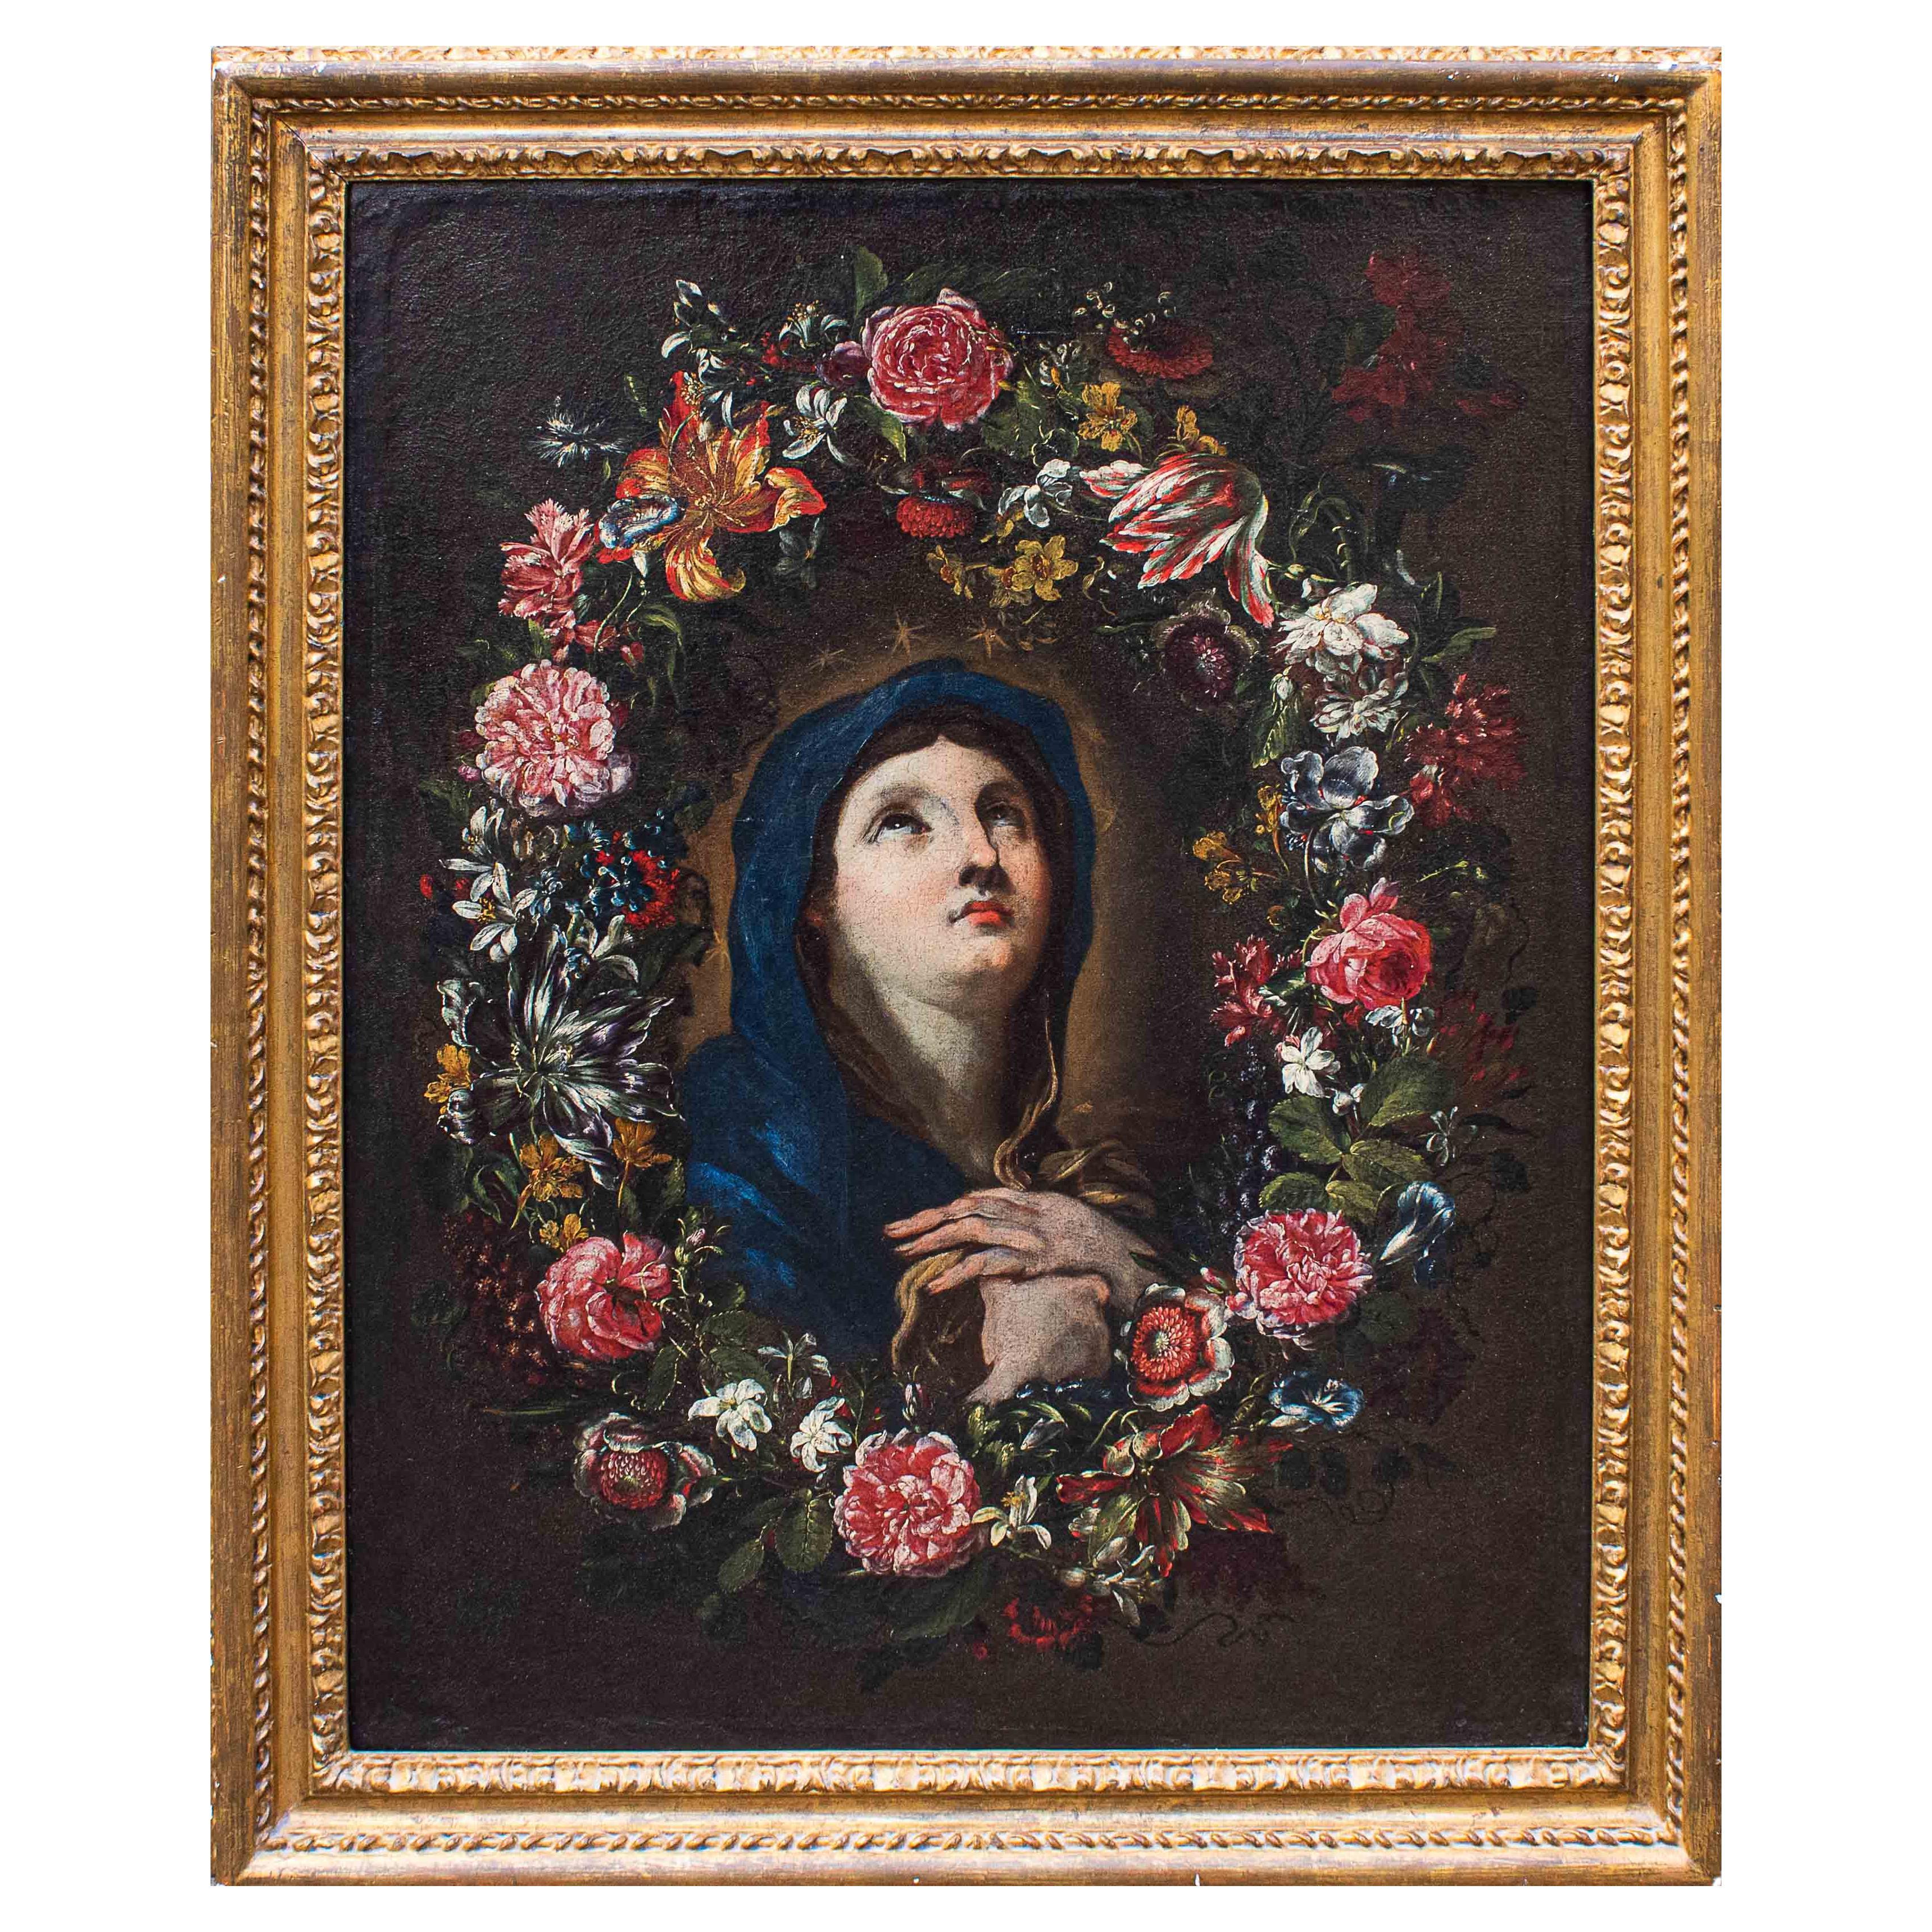 17th-18th Century Virgin with in Garland of Flowers Painting Oil on Canvas